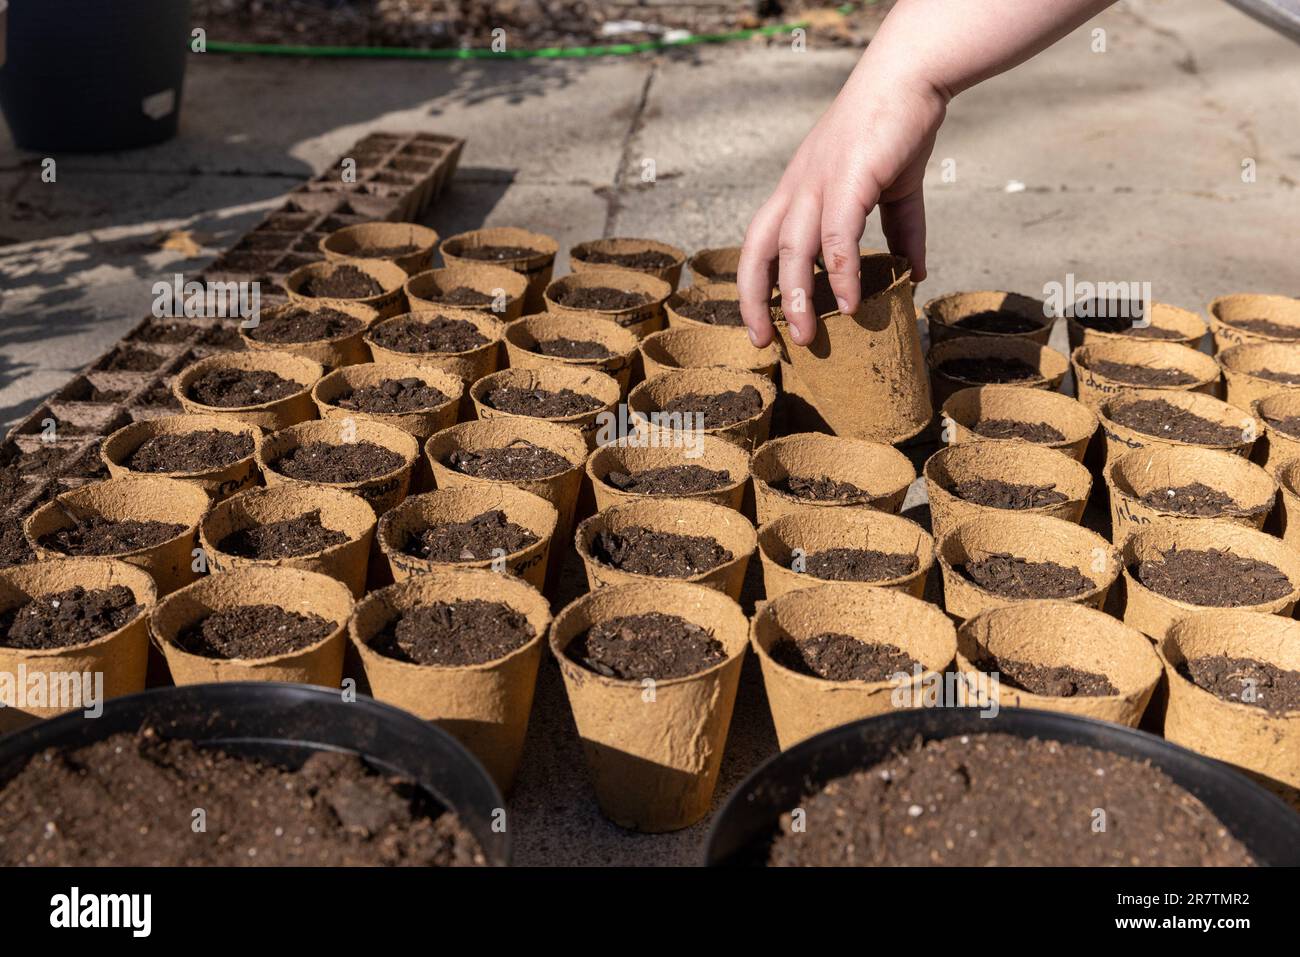 Hand grabbing one item from rows of peat pots Stock Photo